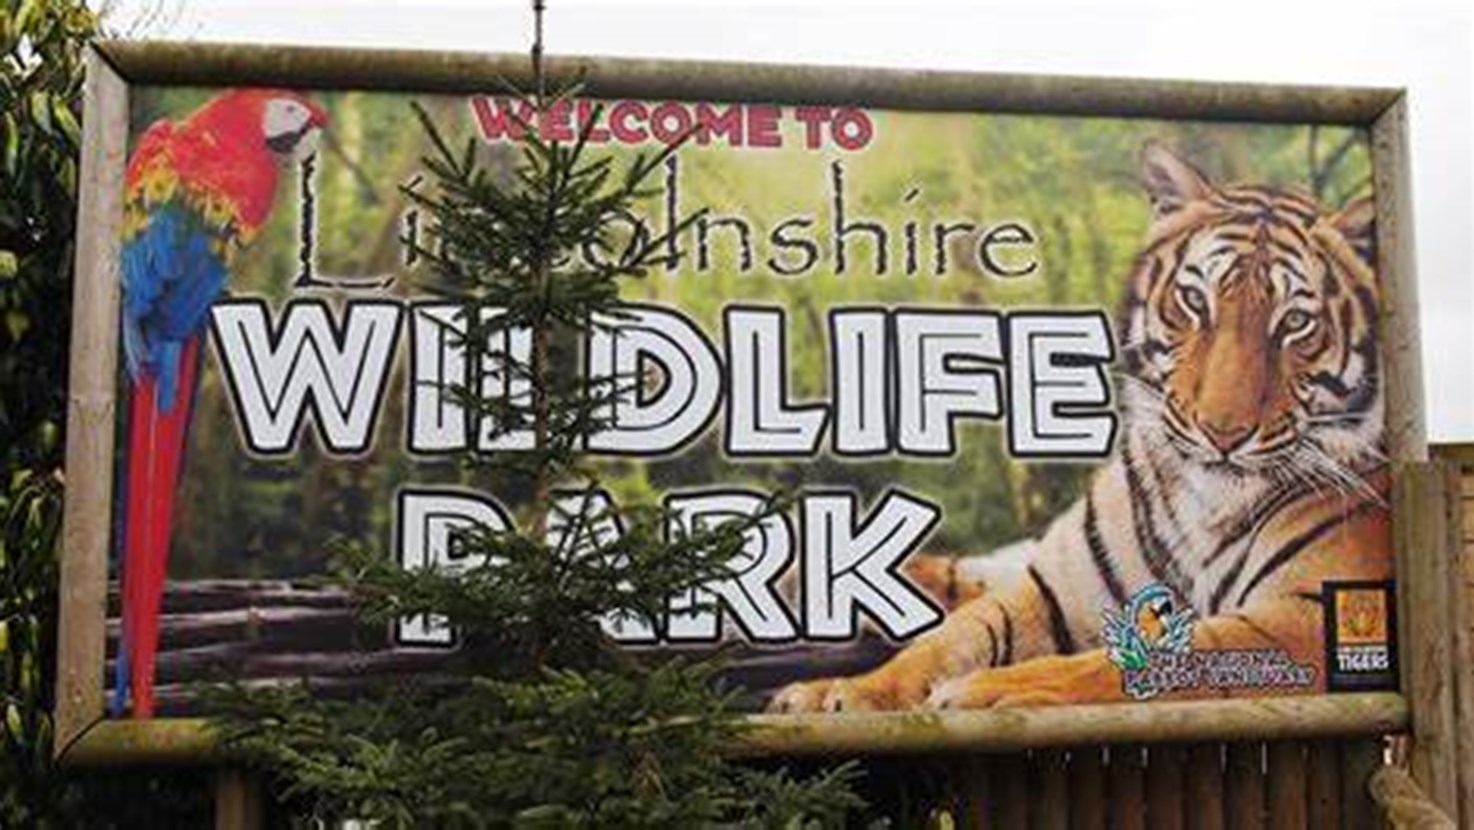 View all of the events and meetings that DPCC Phil Clark attended or hosted at Lincolnshire Wildlife Park in 2022